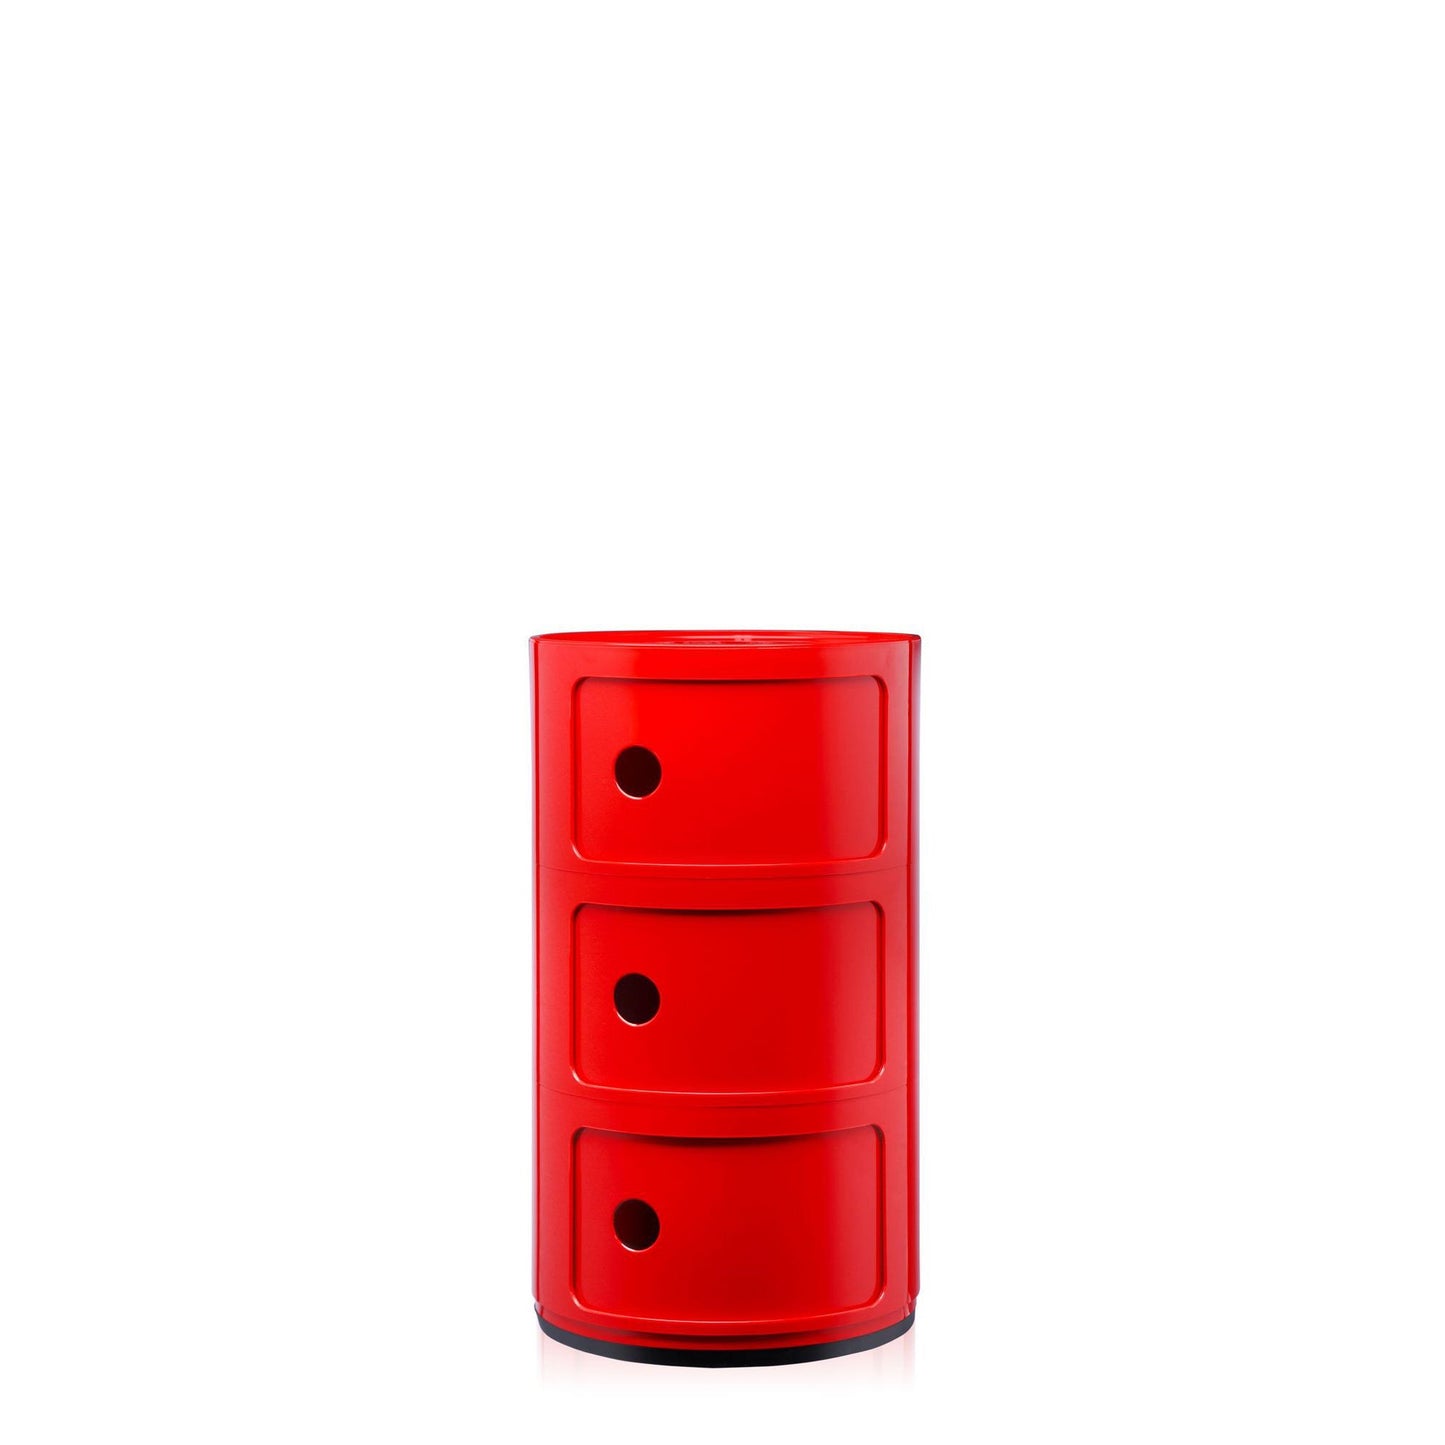 Componibili 3 Cabinet by Kartell #Red